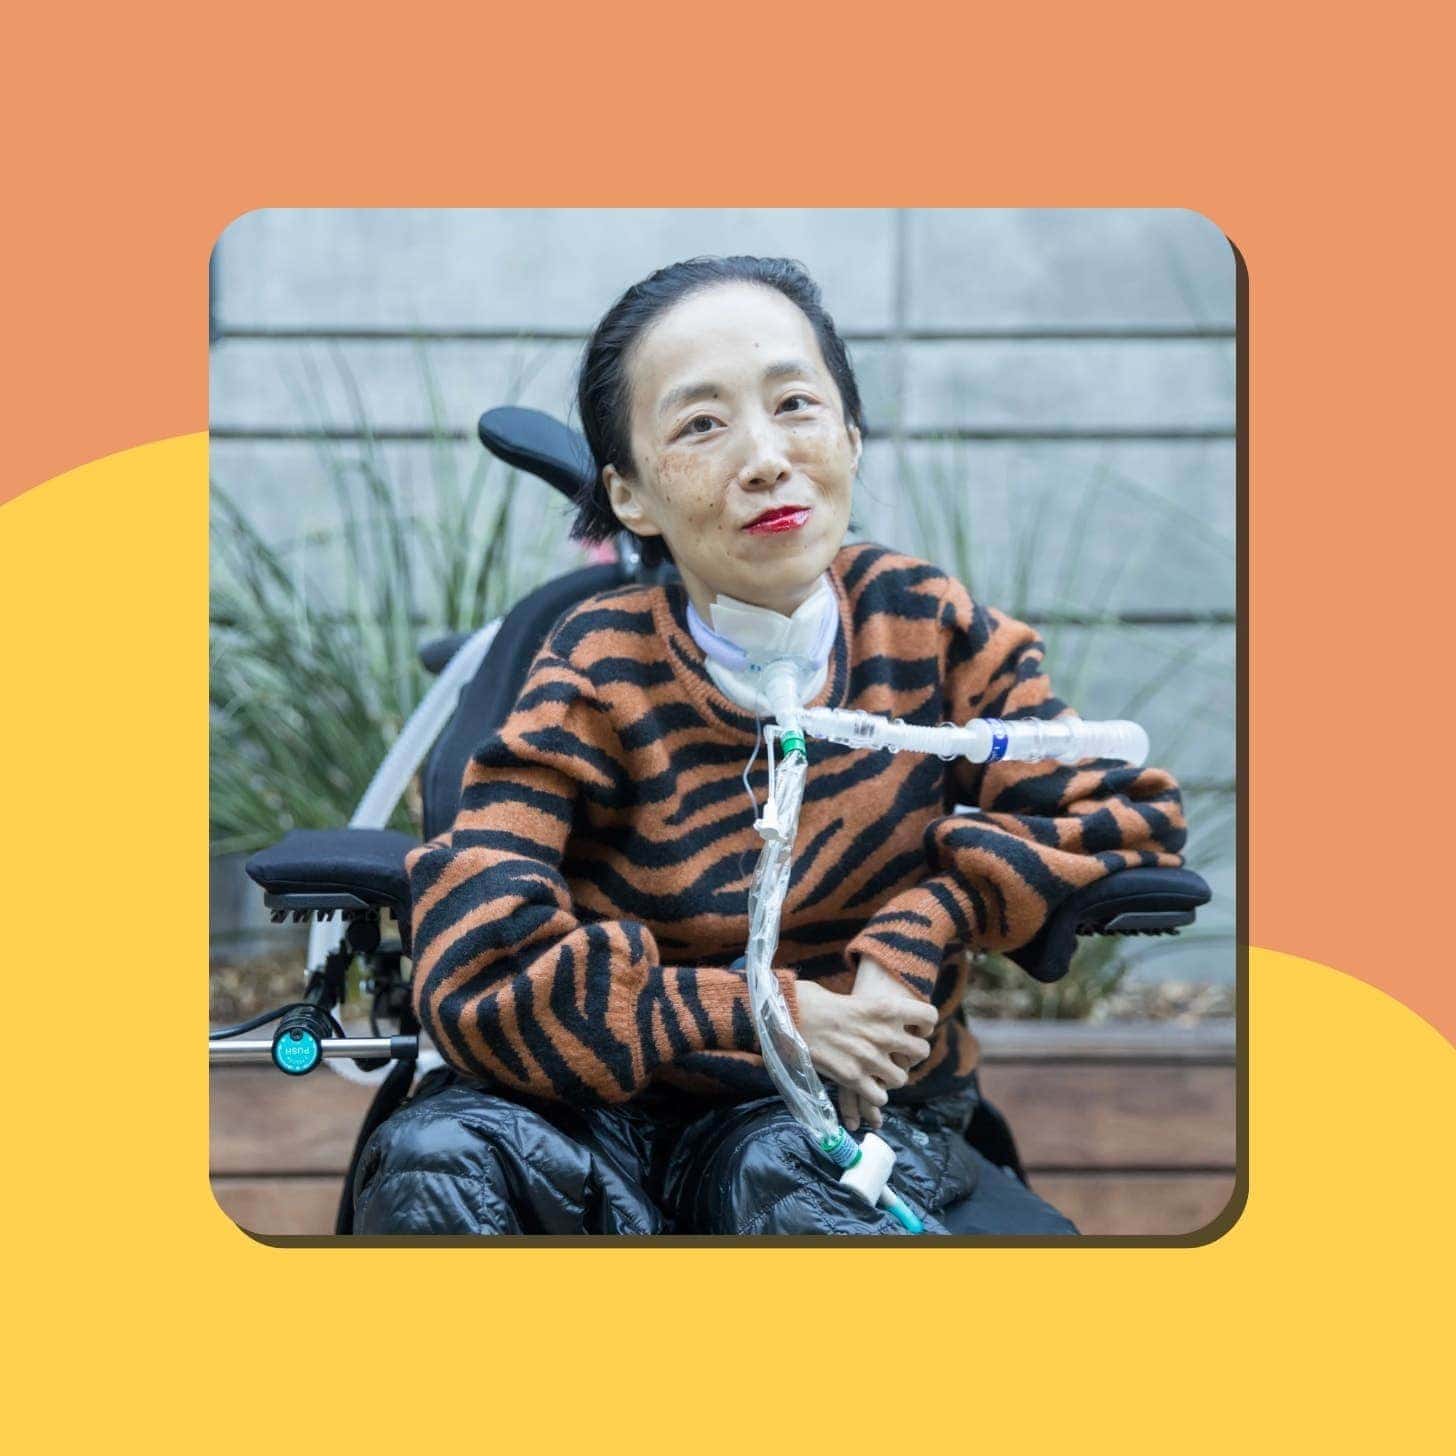 An Asian woman wears bold red lipstick and a fluffy orange sweater — she has a tube coming out of her neck and wrapping behind and in front of her as she sits in a wheelchair